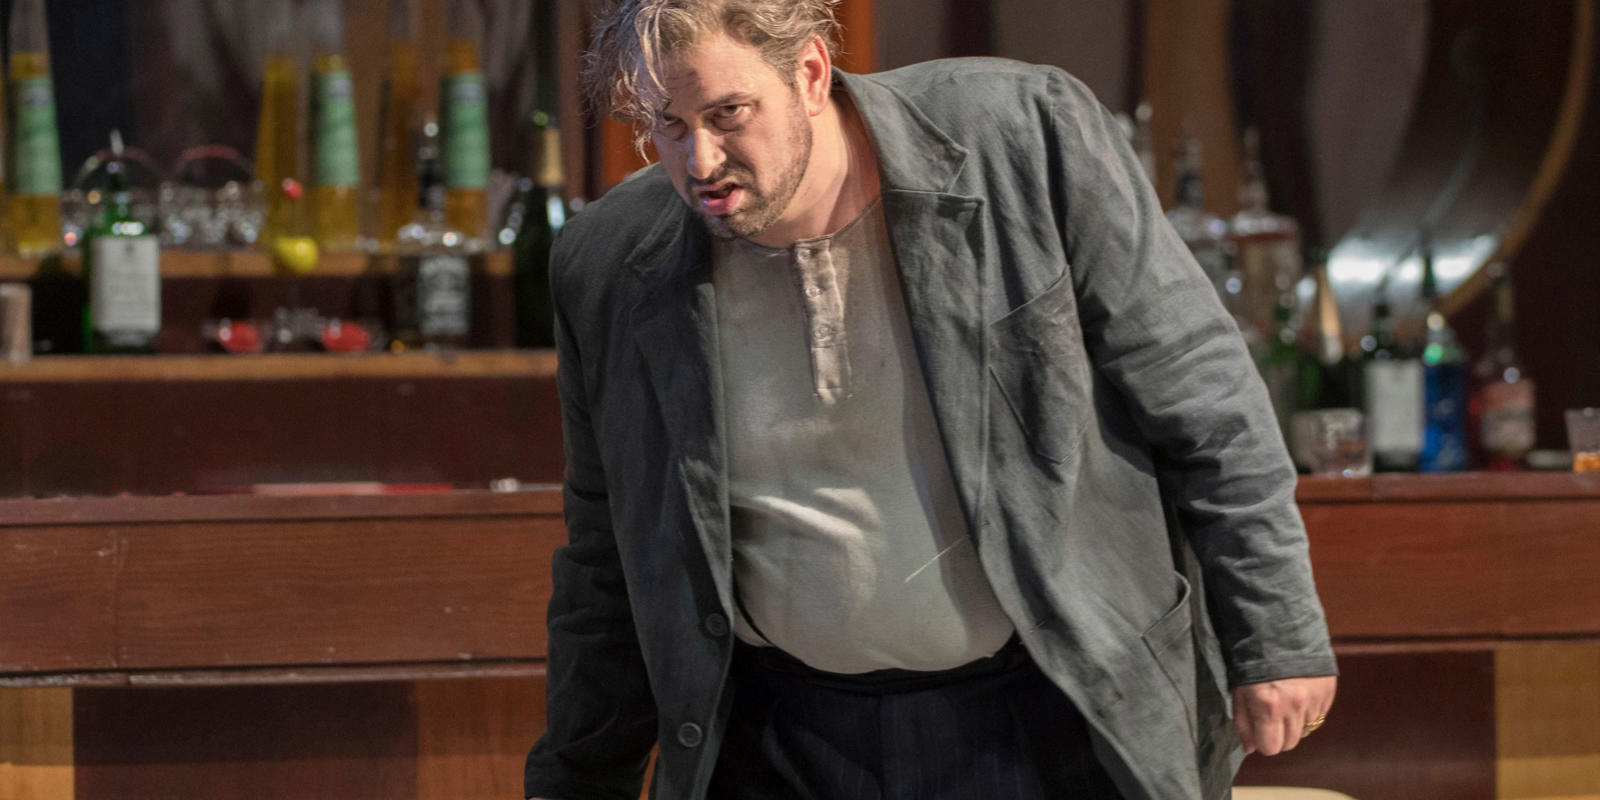 Nicholas Pallesen looking drunk in a bar from ENO's Rigoletto